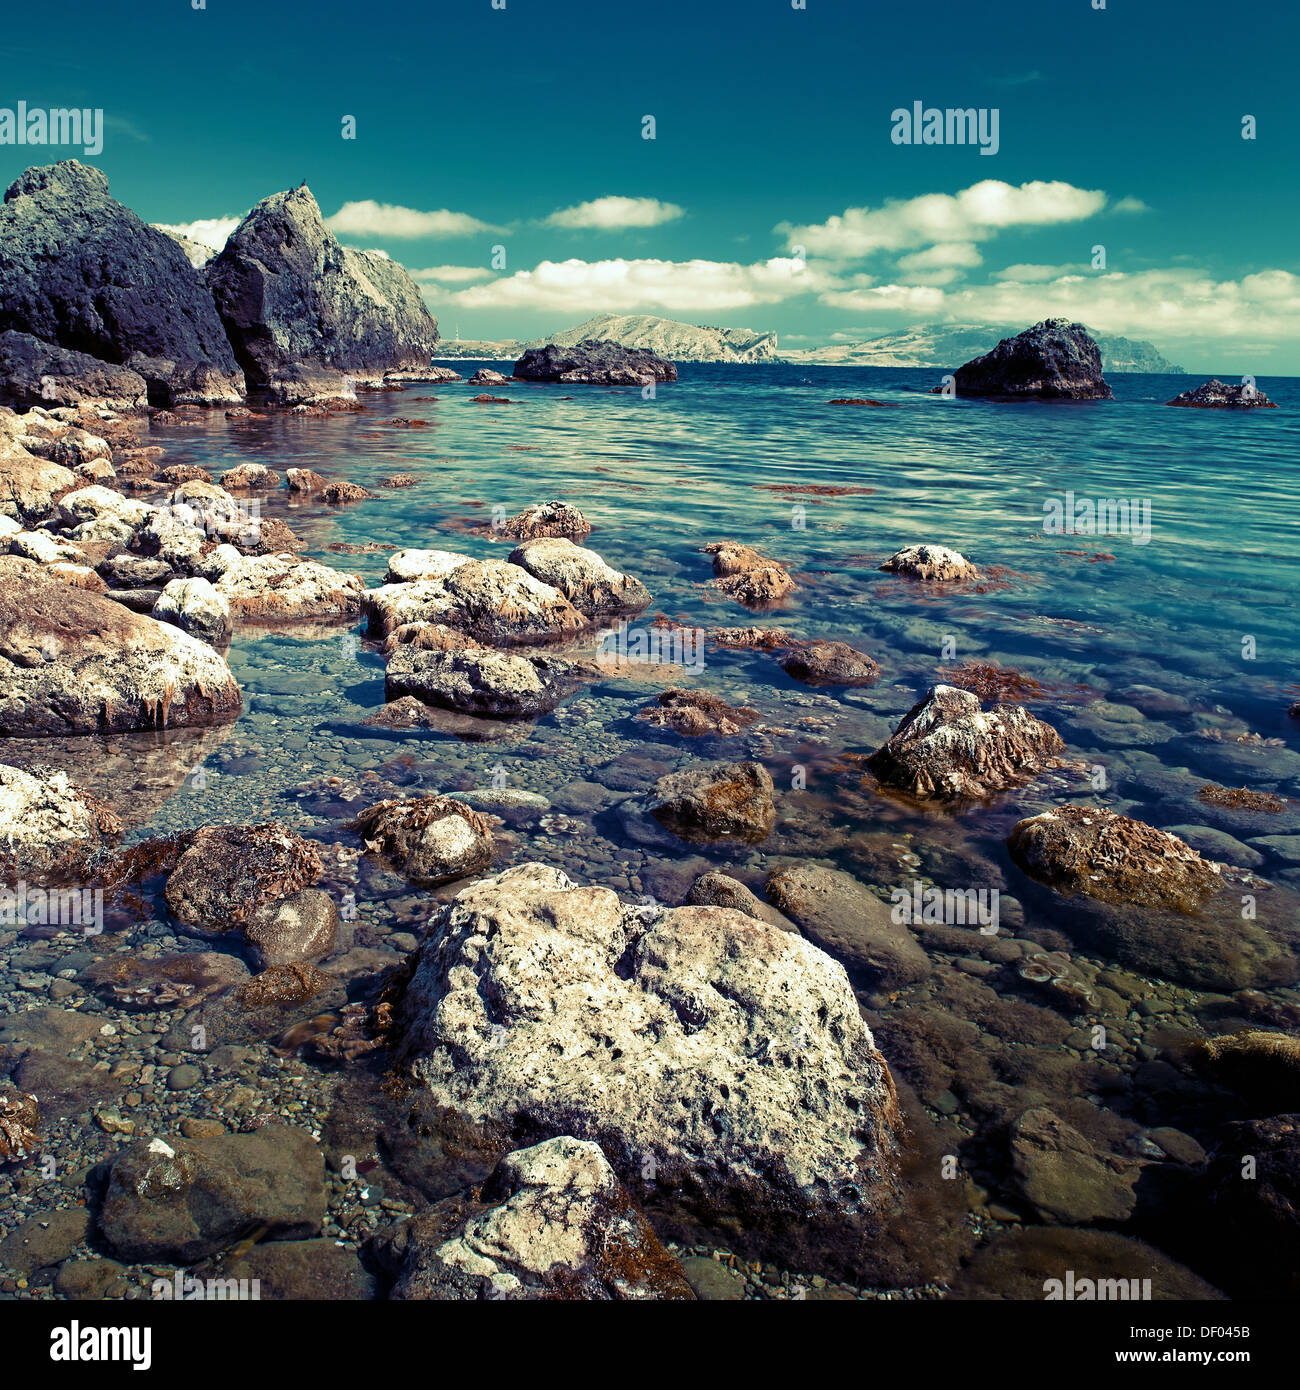 Day time on the sea, natural landscape for your design Stock Photo